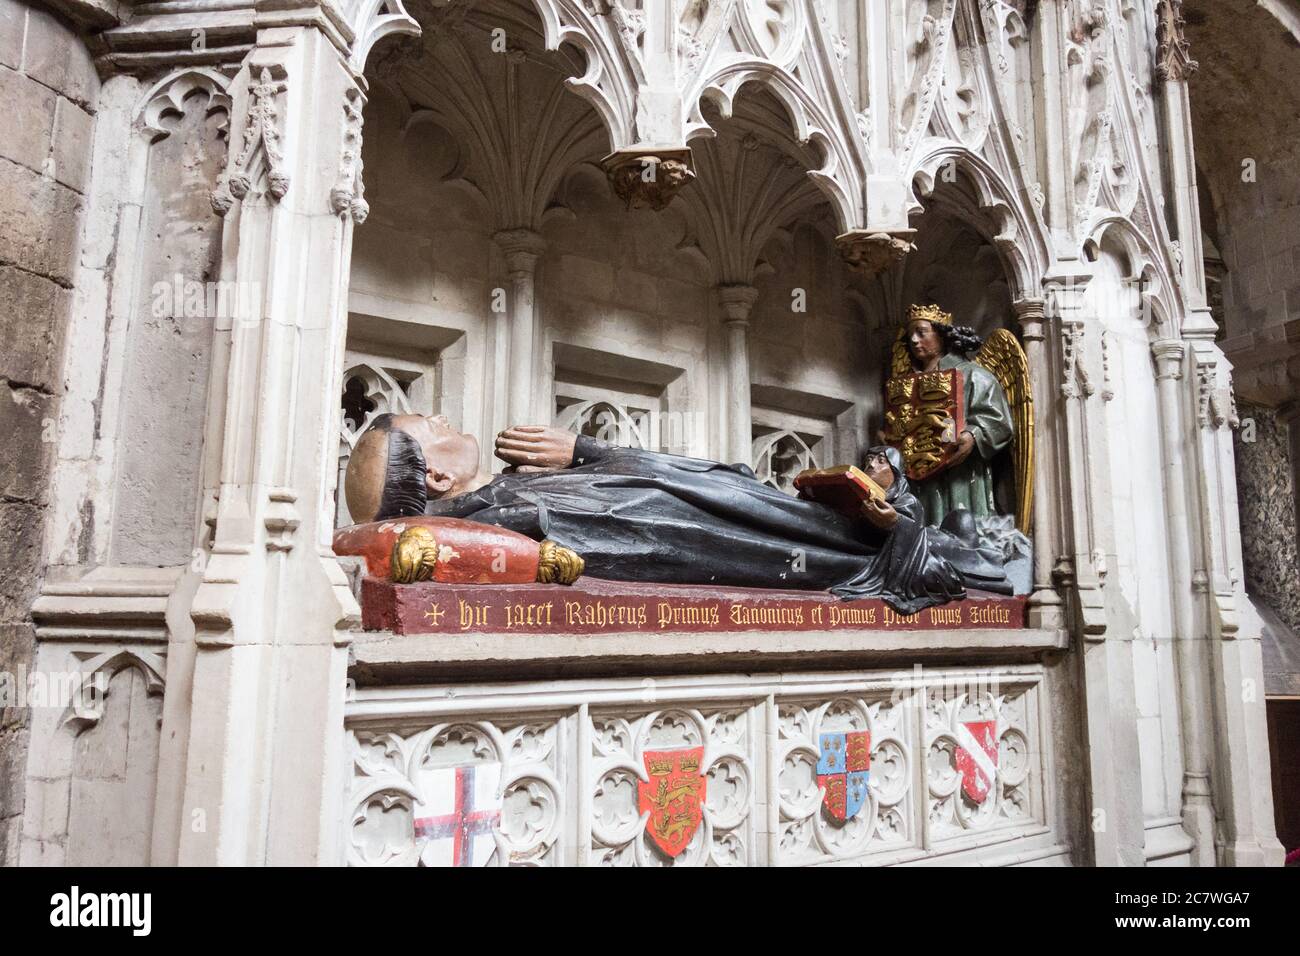 The tomb of Rahere in the Priory Church of St Bartholomew the Great, Cloth Fair, West Smithfield, London, EC1, UK Stock Photo